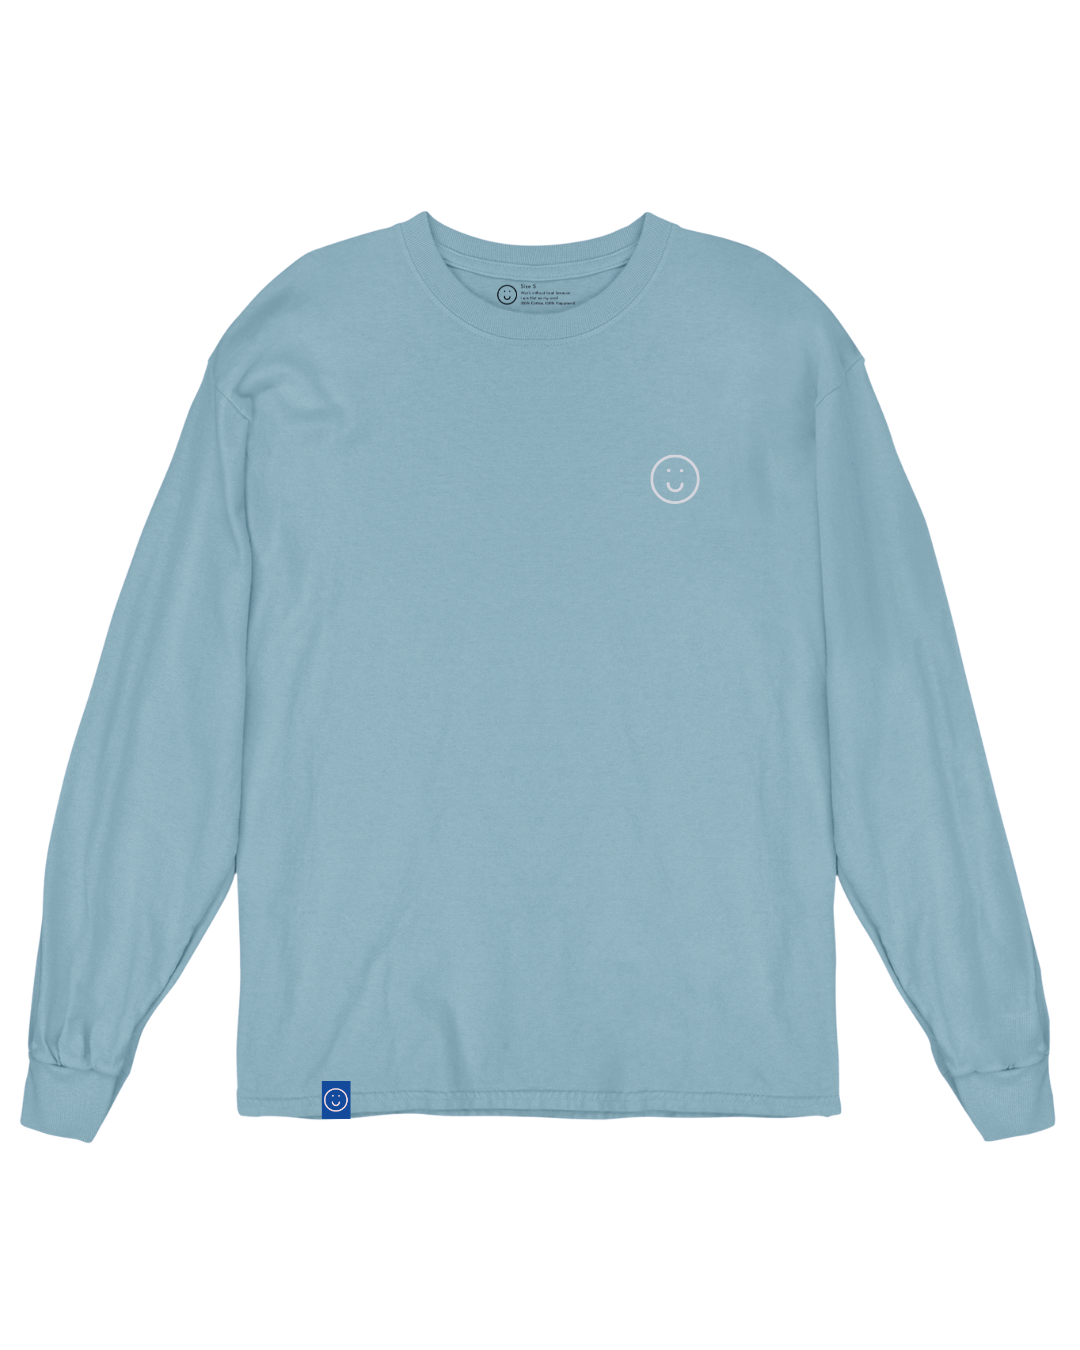 Signature Long Sleeve Tee in Dusty Blue